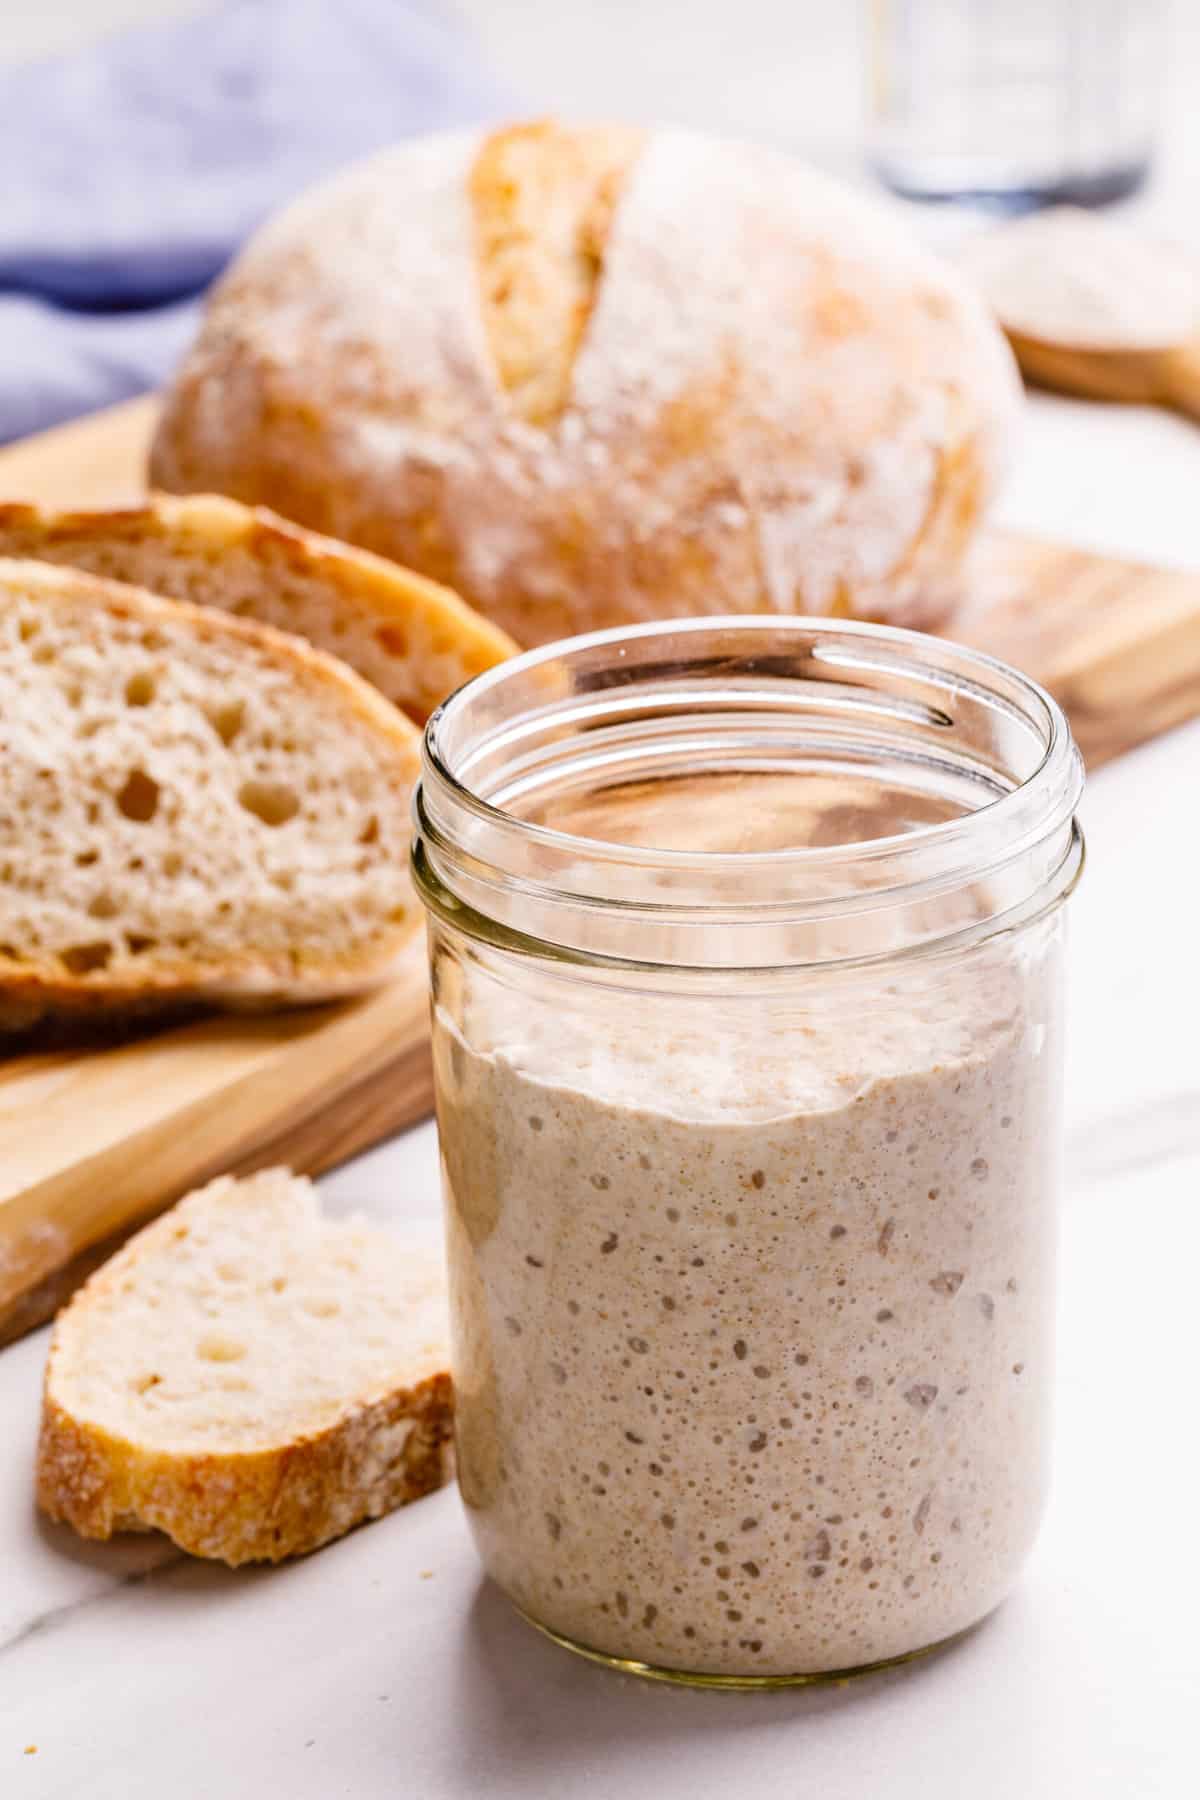 close up image of sourdough starter in a glass jar with sourdough bread in the background